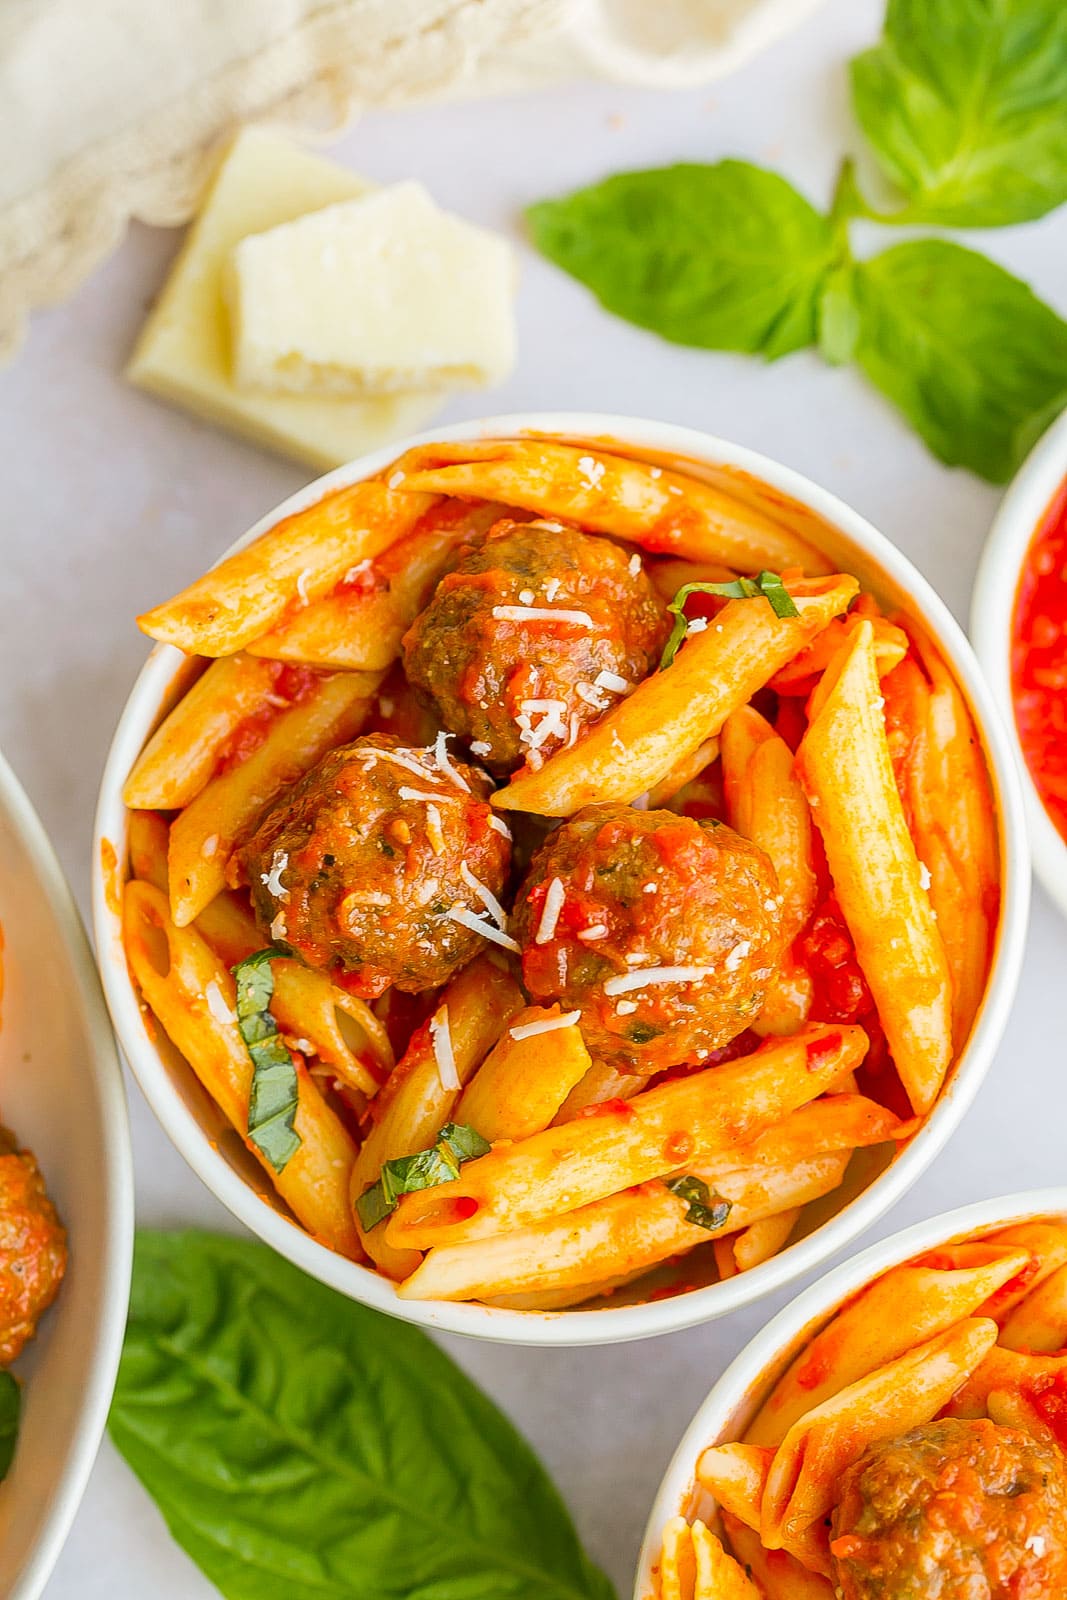 Pasta with mini meatballs in a bowl.